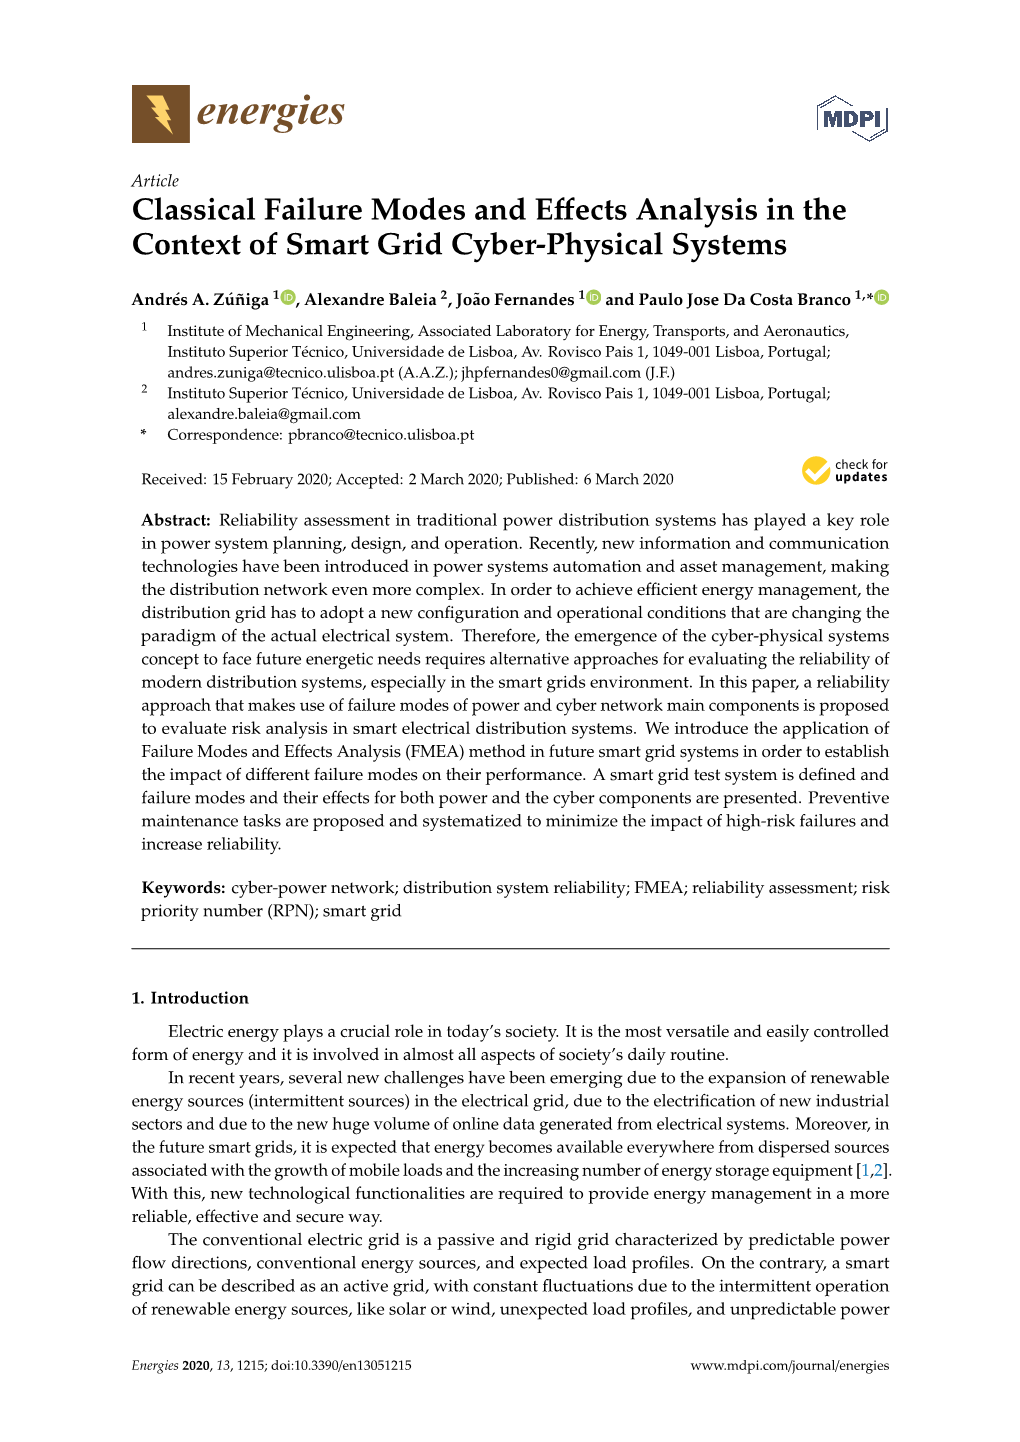 Classical Failure Modes and Effects Analysis in the Context of Smart Grid Cyber-Physical Systems